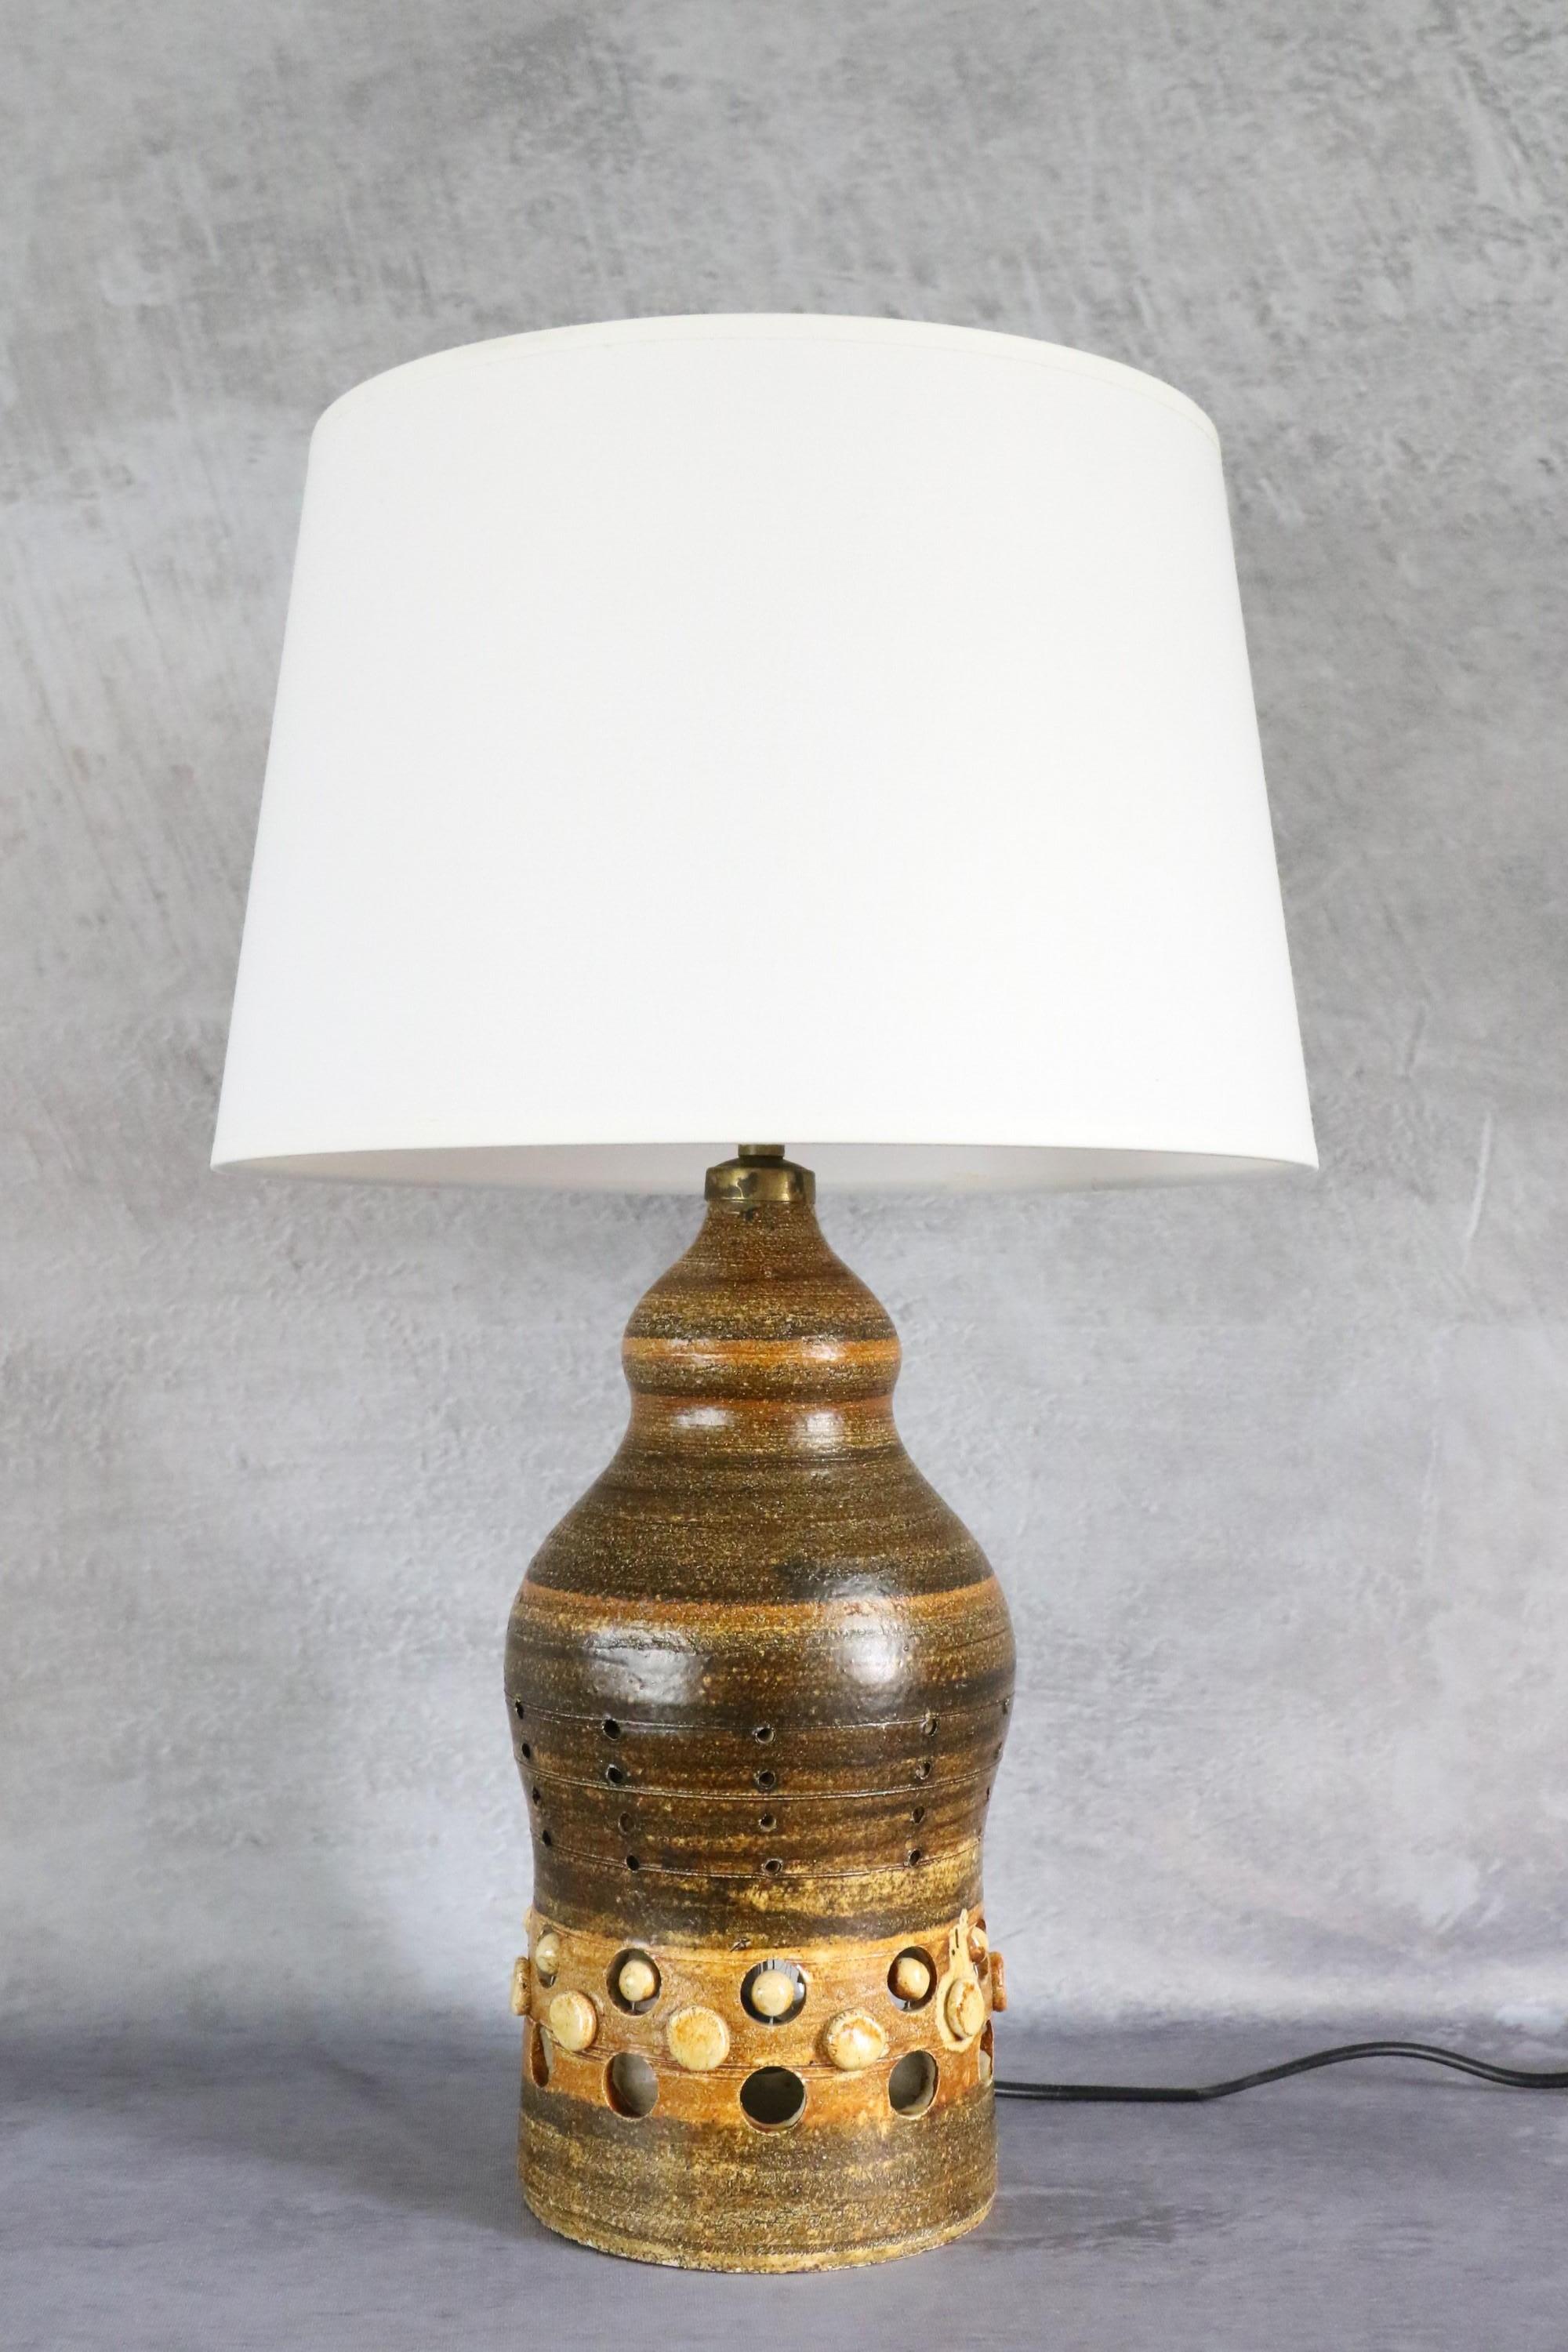 Double lighting French ceramic lamp by Georges Pelletier, 1970s.

It is a beautiful ceramic lamp. It offers a double lighting since a second bulb is inside the lamp base. The light is very soft and allows to highlight the characteristic shapes of